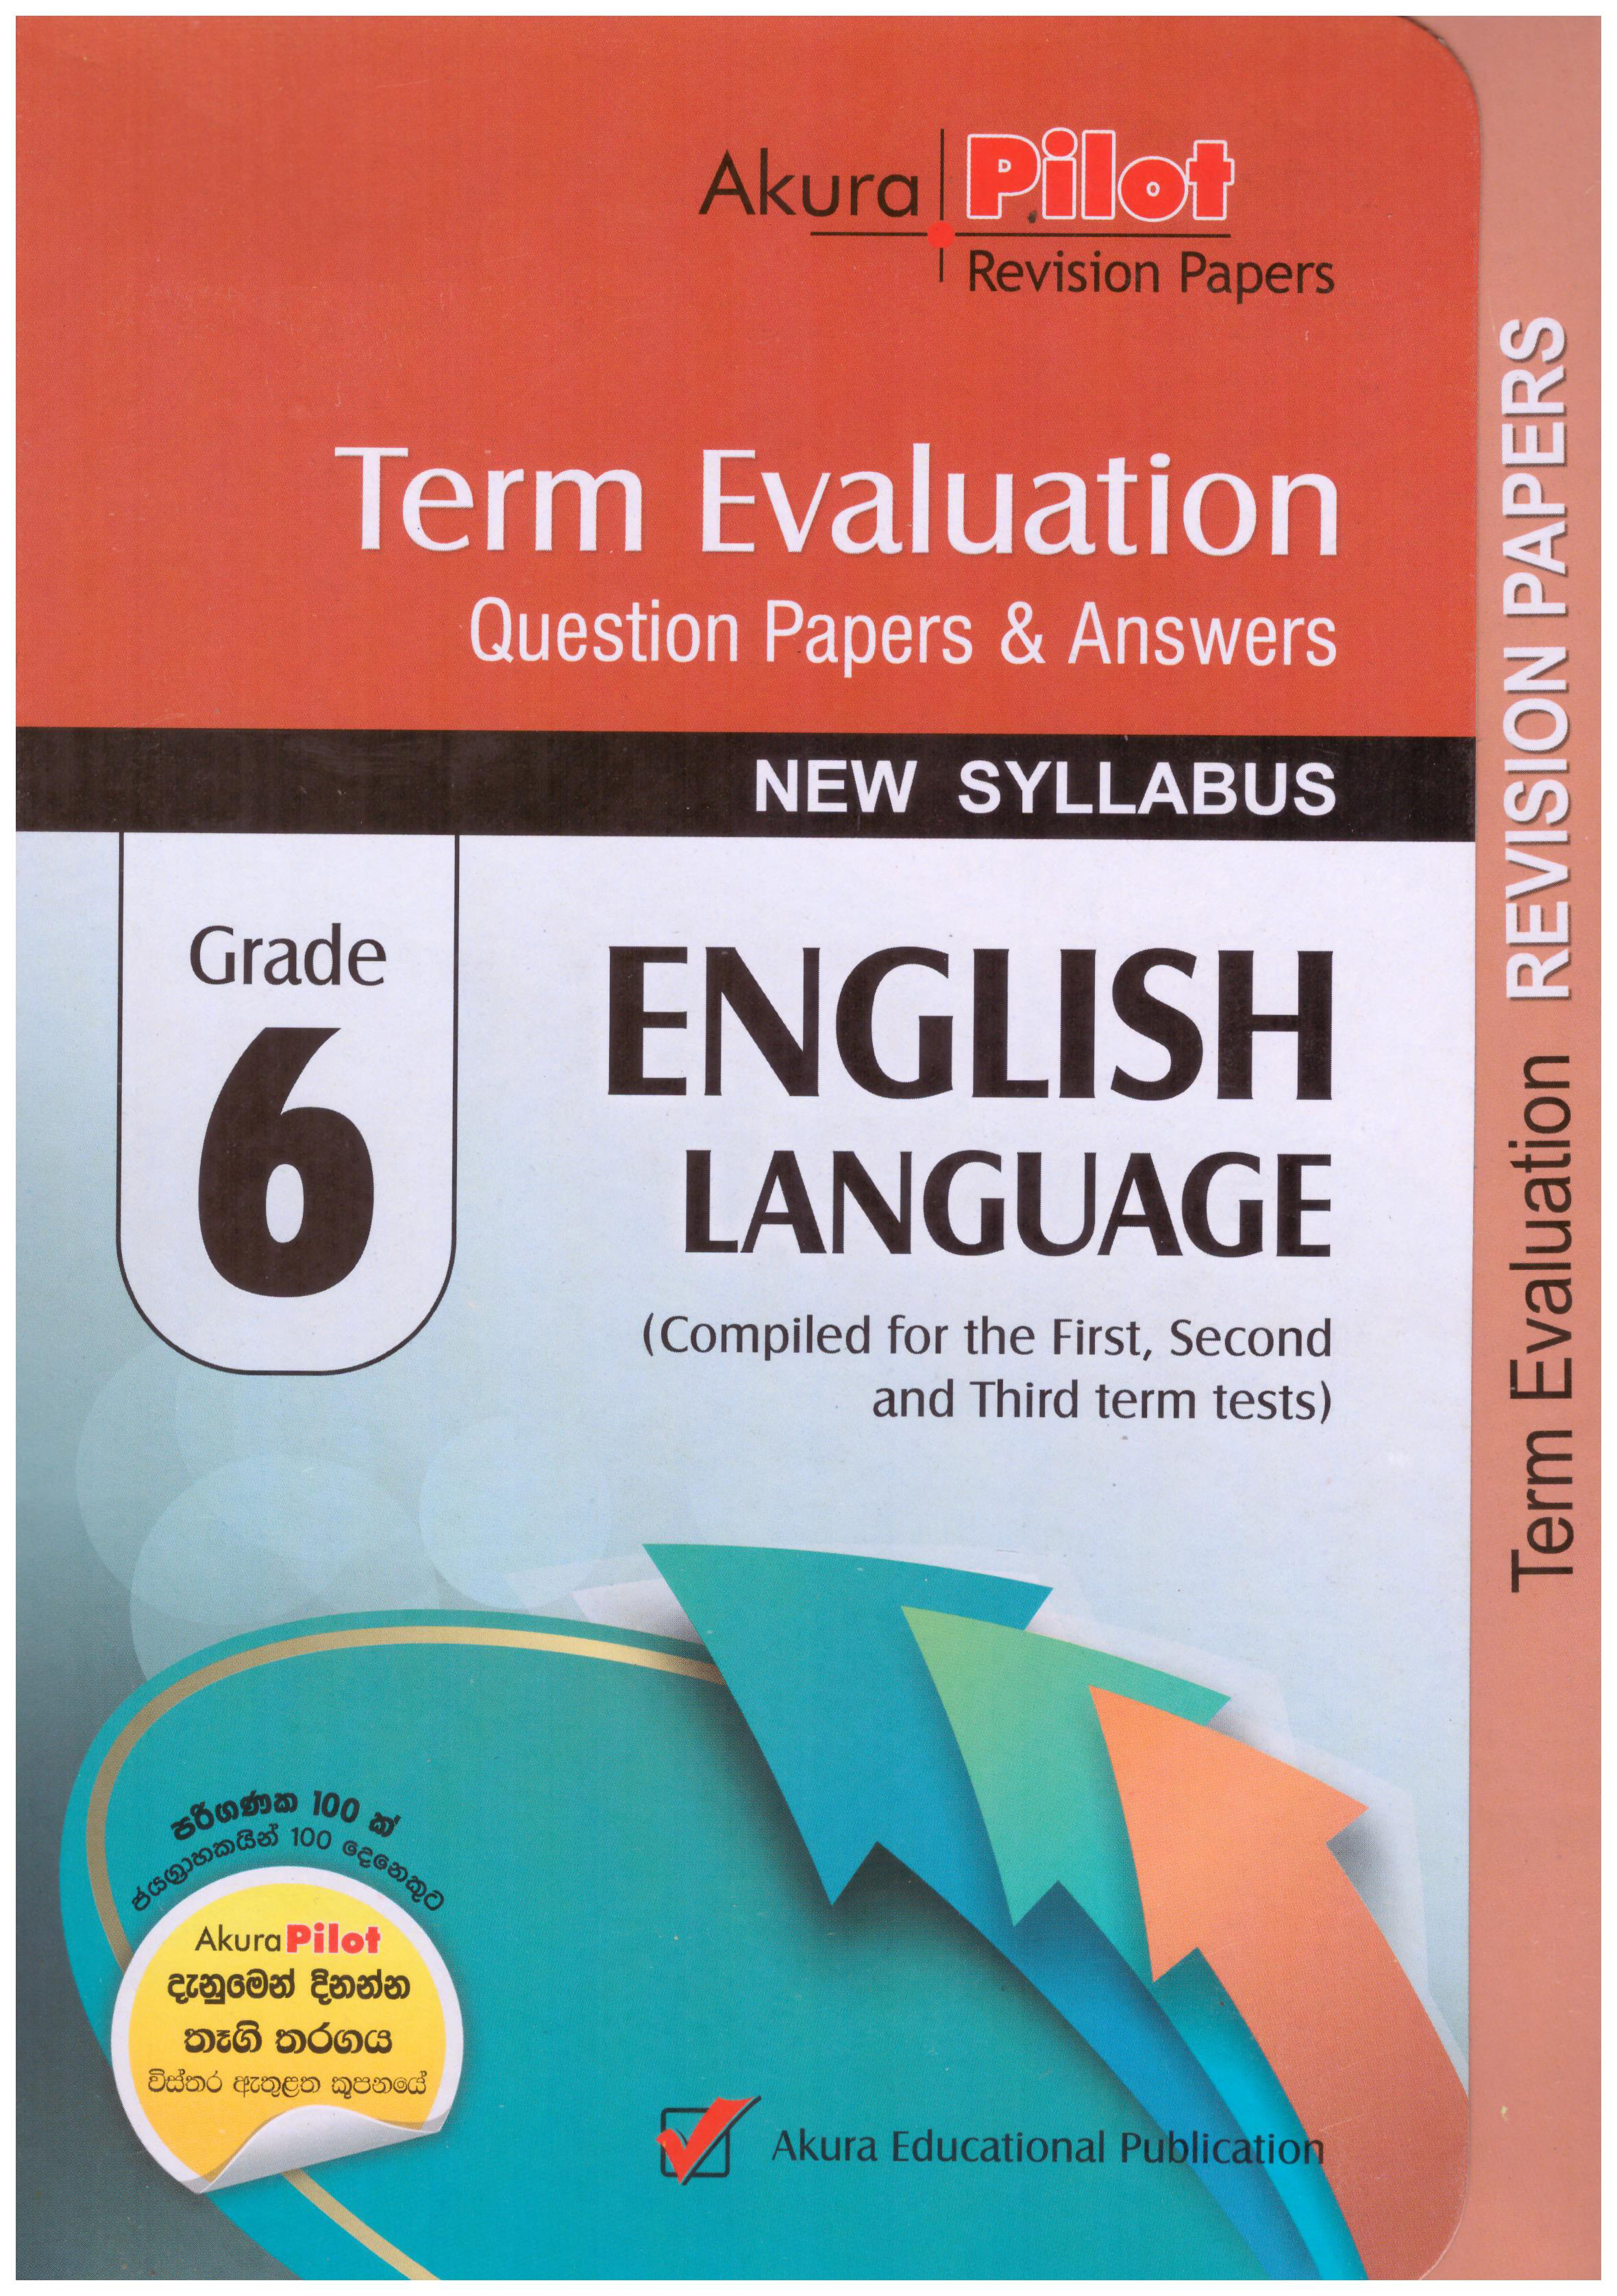 Akura Pilot Grade 6 English Language : Term Evaluation Question Papers and Answers (New Syllabus)